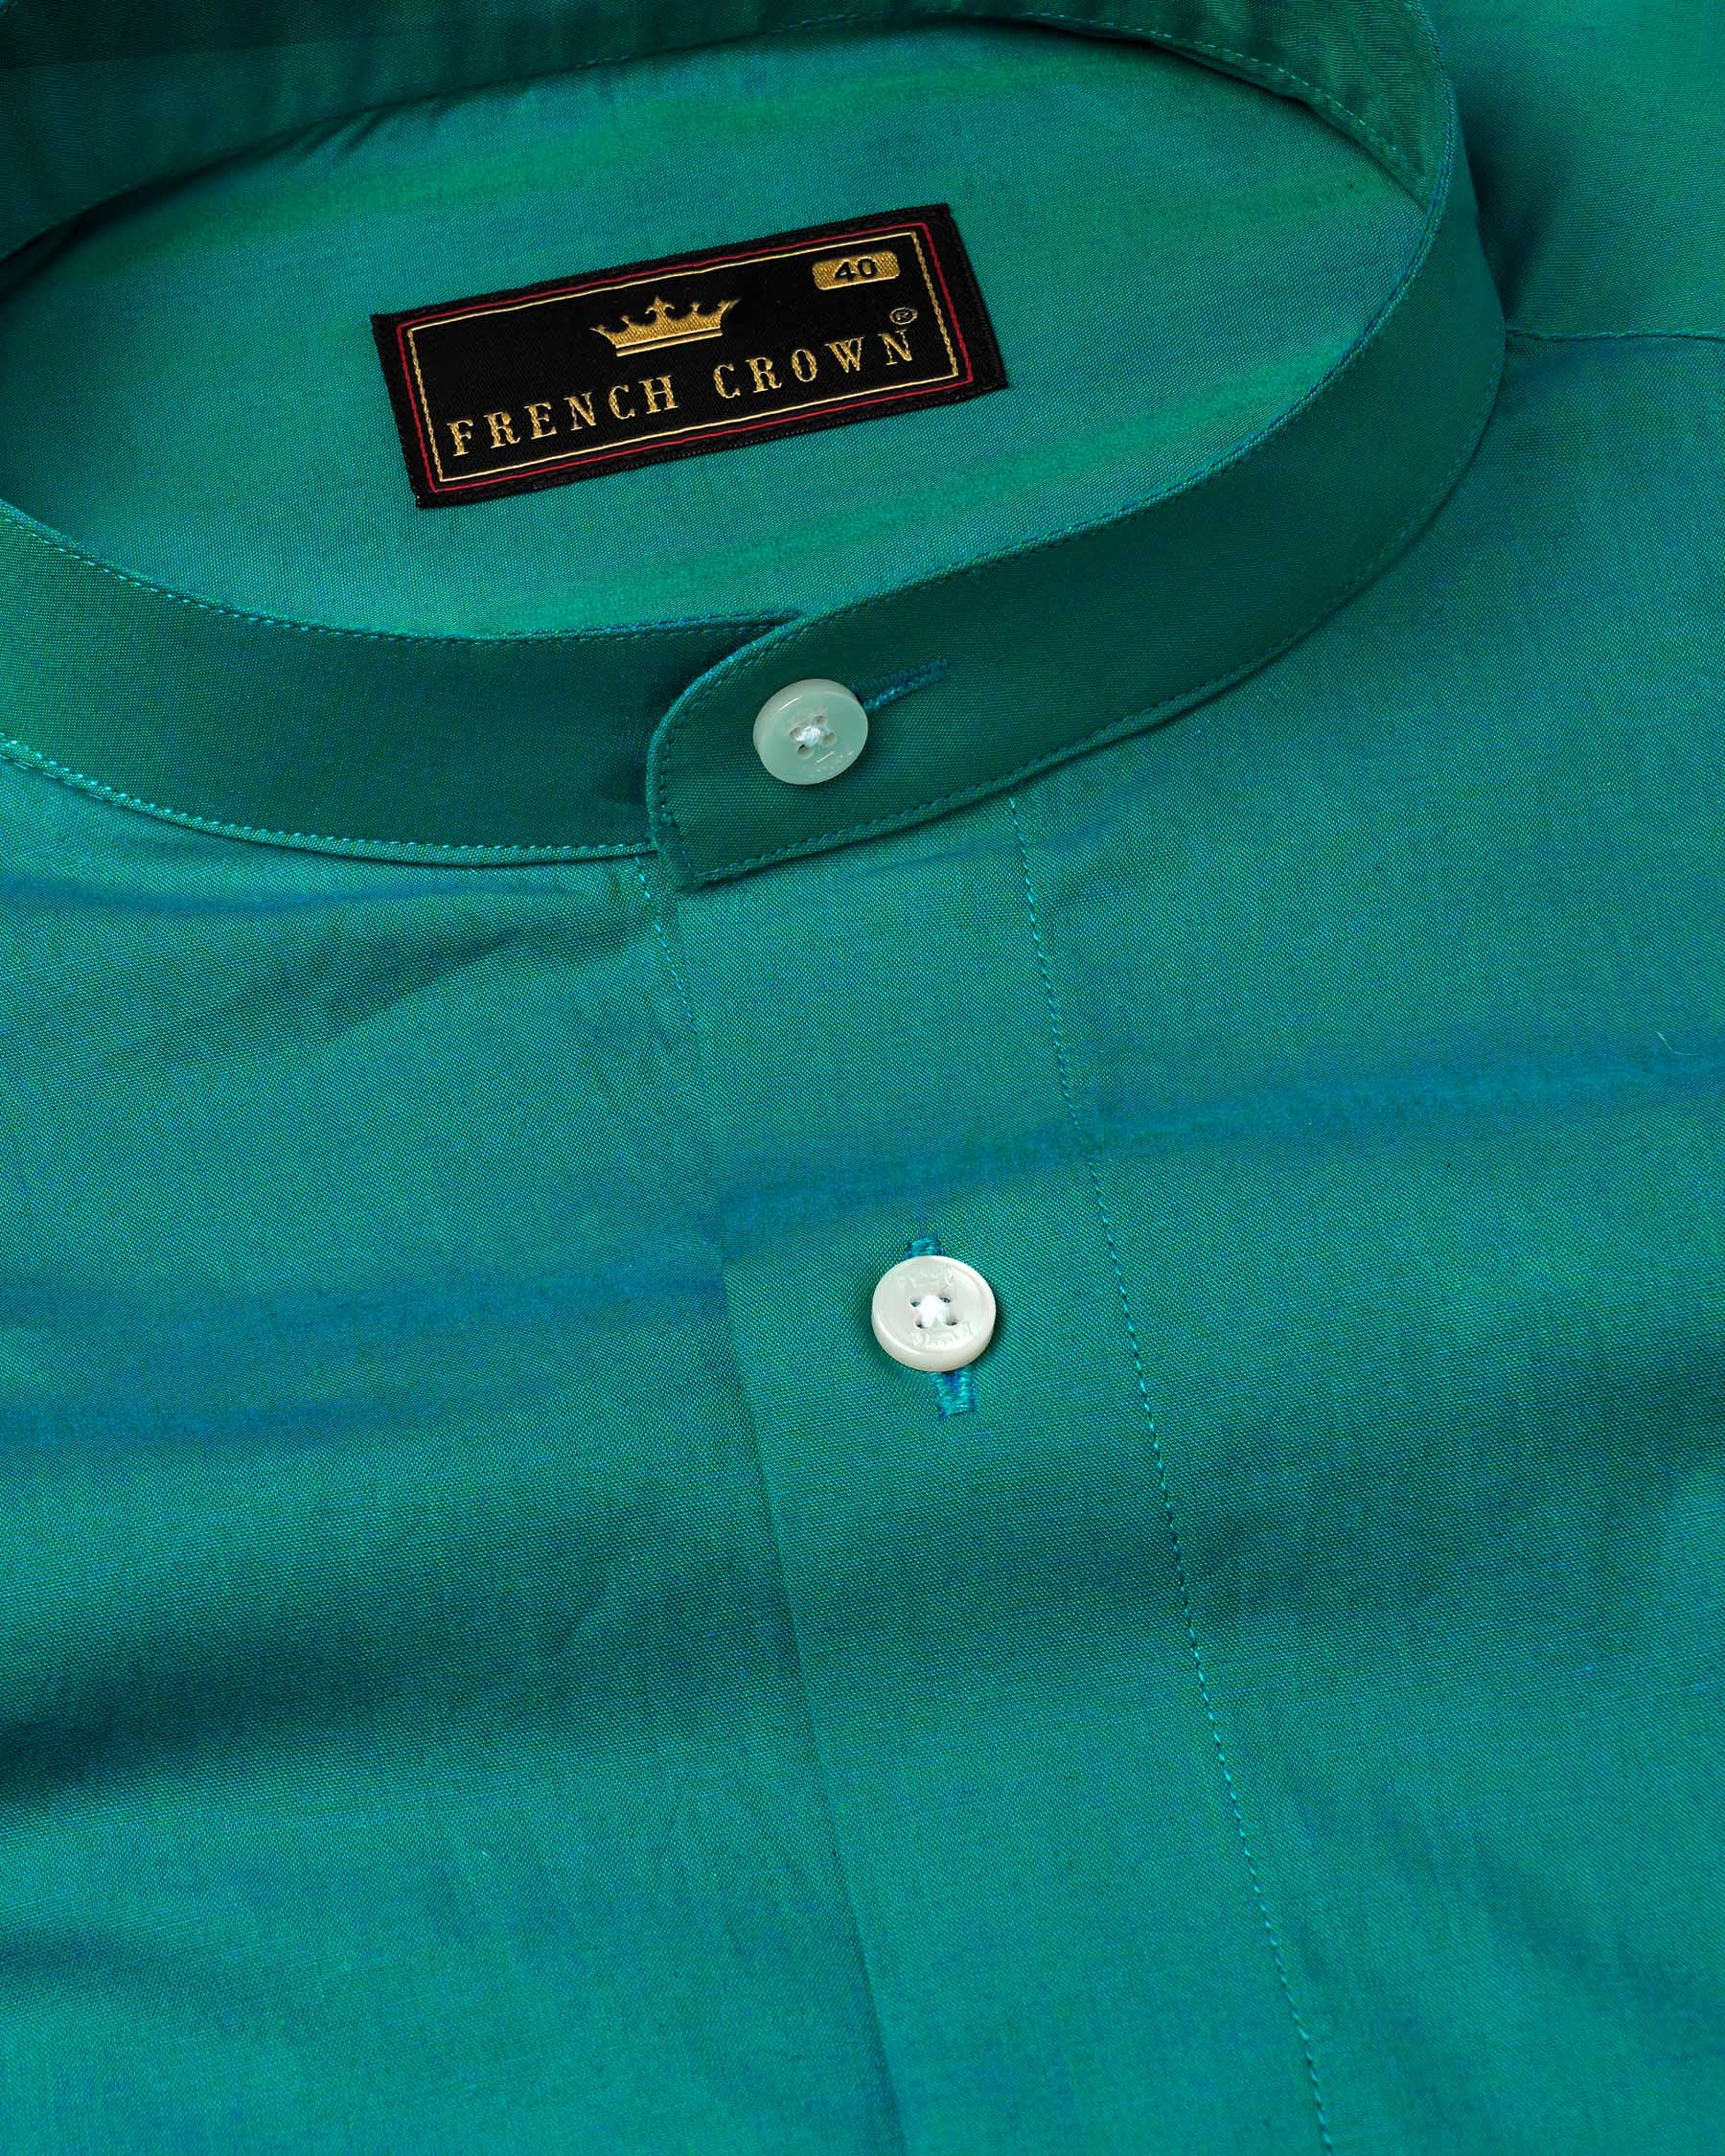 Teal Green Chambray Textured Premium Cotton Shirt 7678-M-38, 7678-M-H-38, 7678-M-39,7678-M-H-39, 7678-M-40, 7678-M-H-40, 7678-M-42, 7678-M-H-42, 7678-M-44, 7678-M-H-44, 7678-M-46, 7678-M-H-46, 7678-M-48, 7678-M-H-48, 7678-M-50, 7678-M-H-50, 7678-M-52, 7678-M-H-52